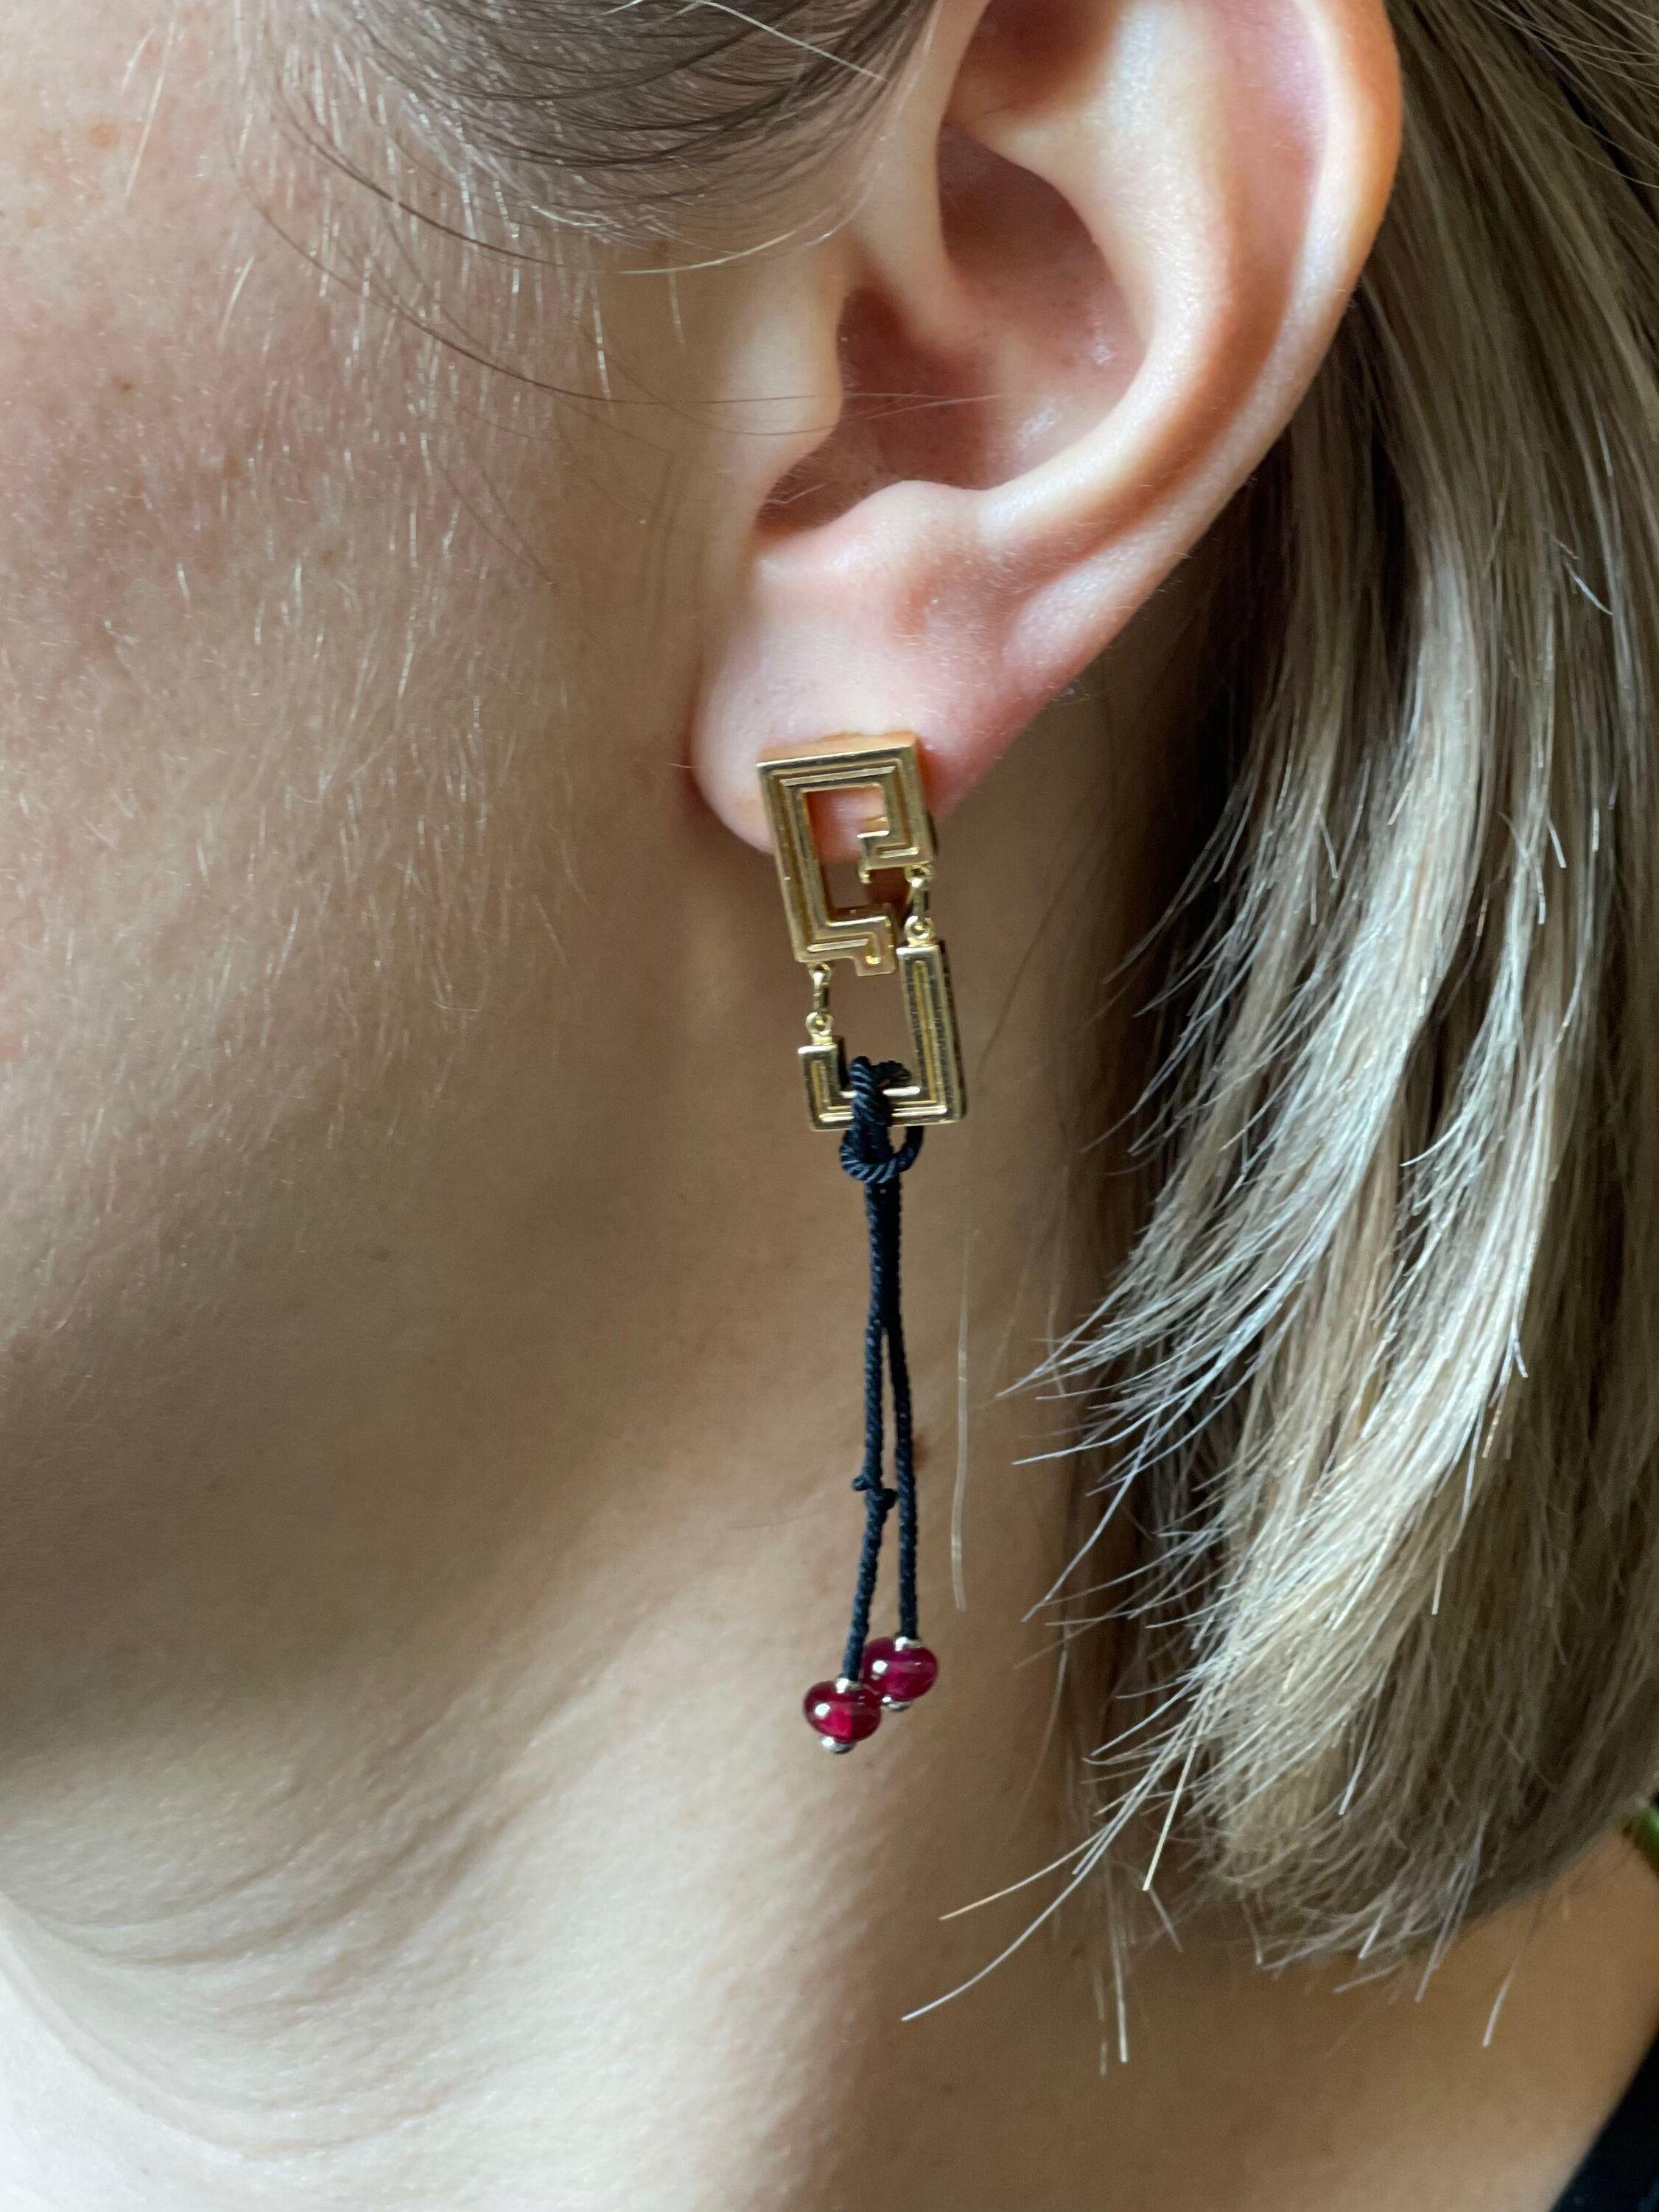 Pair of 18k gold earrings by Cartier, from La Baiser du Dragon collection, featuring black cord drops with ruby cabochons. Earrings are 2.5